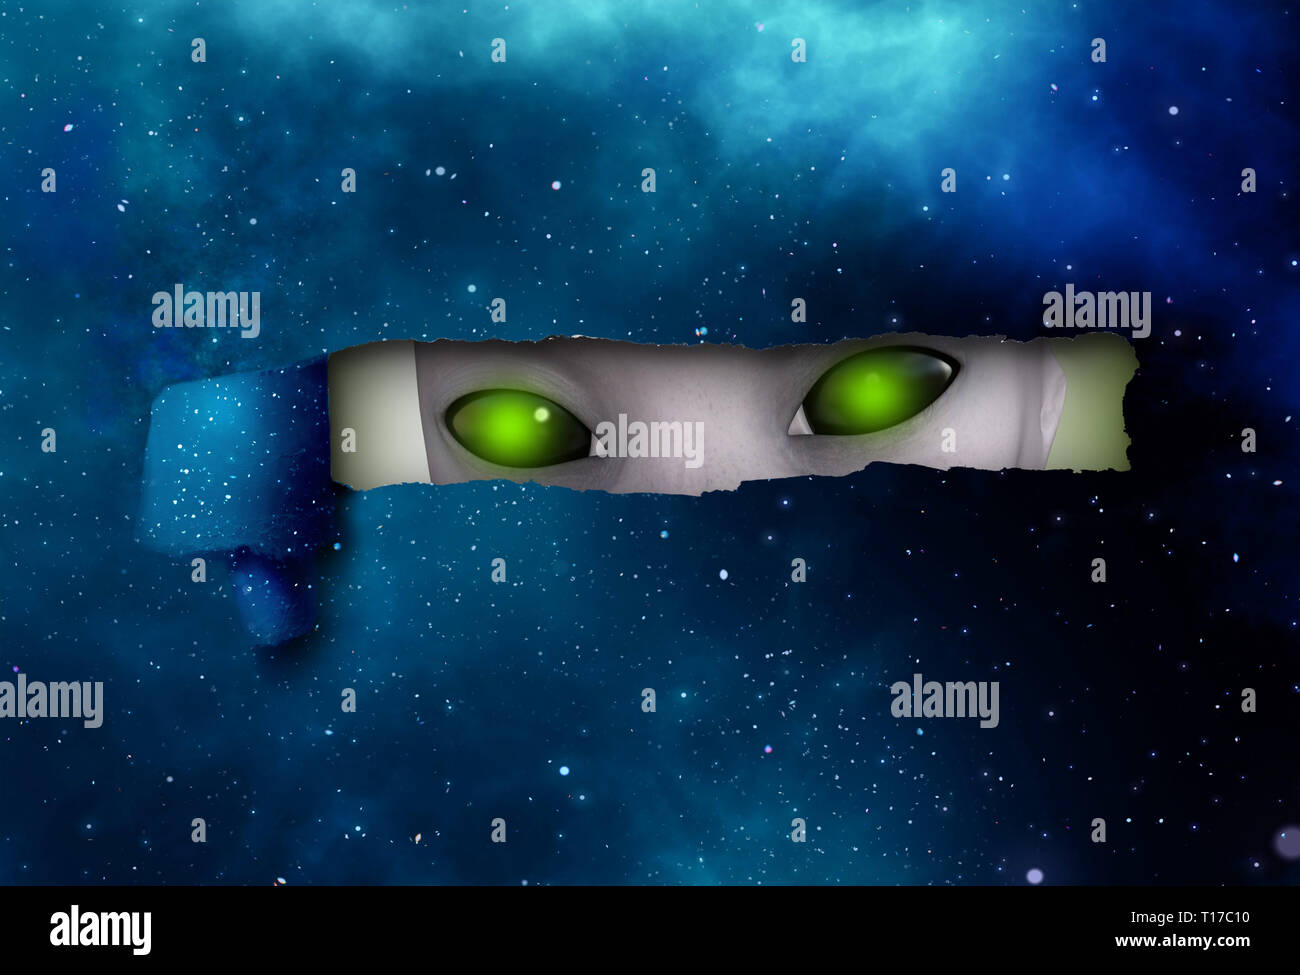 Alien eyes spying behind hole ripped curl piece of universe Stock Photo